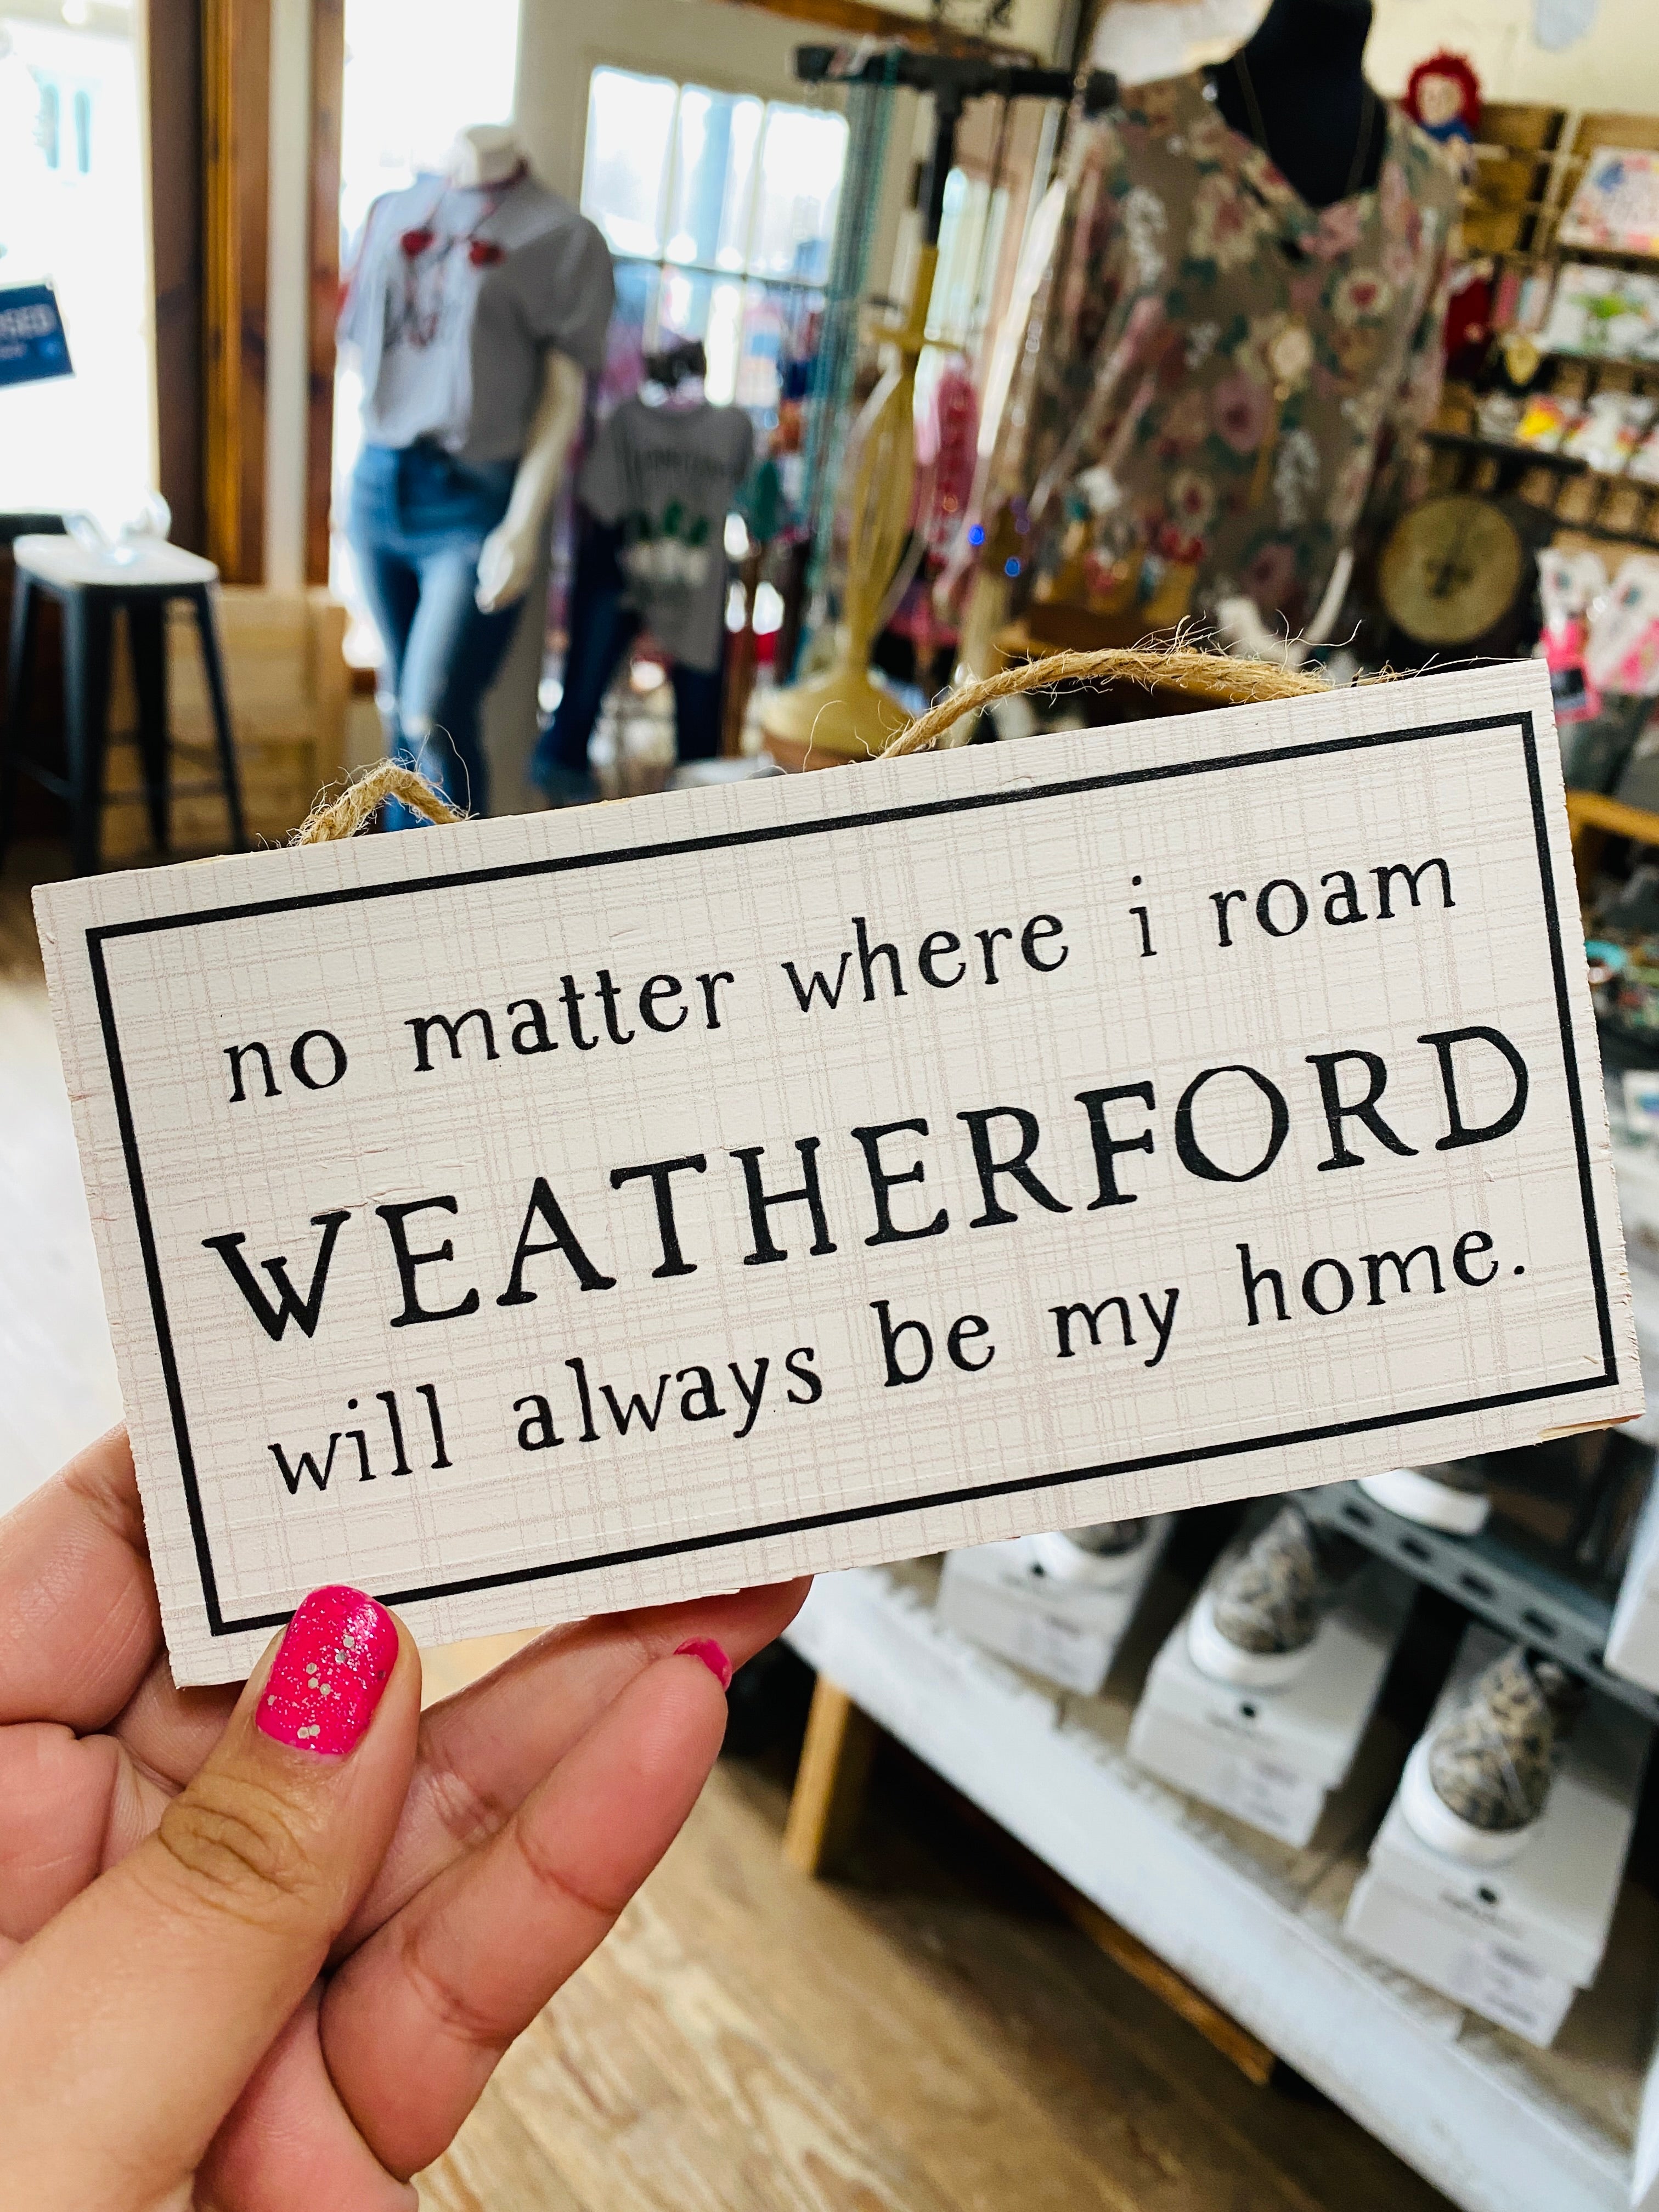 No Matter Where I Roam Weatherford Will Always Be My Home Hanging Sign